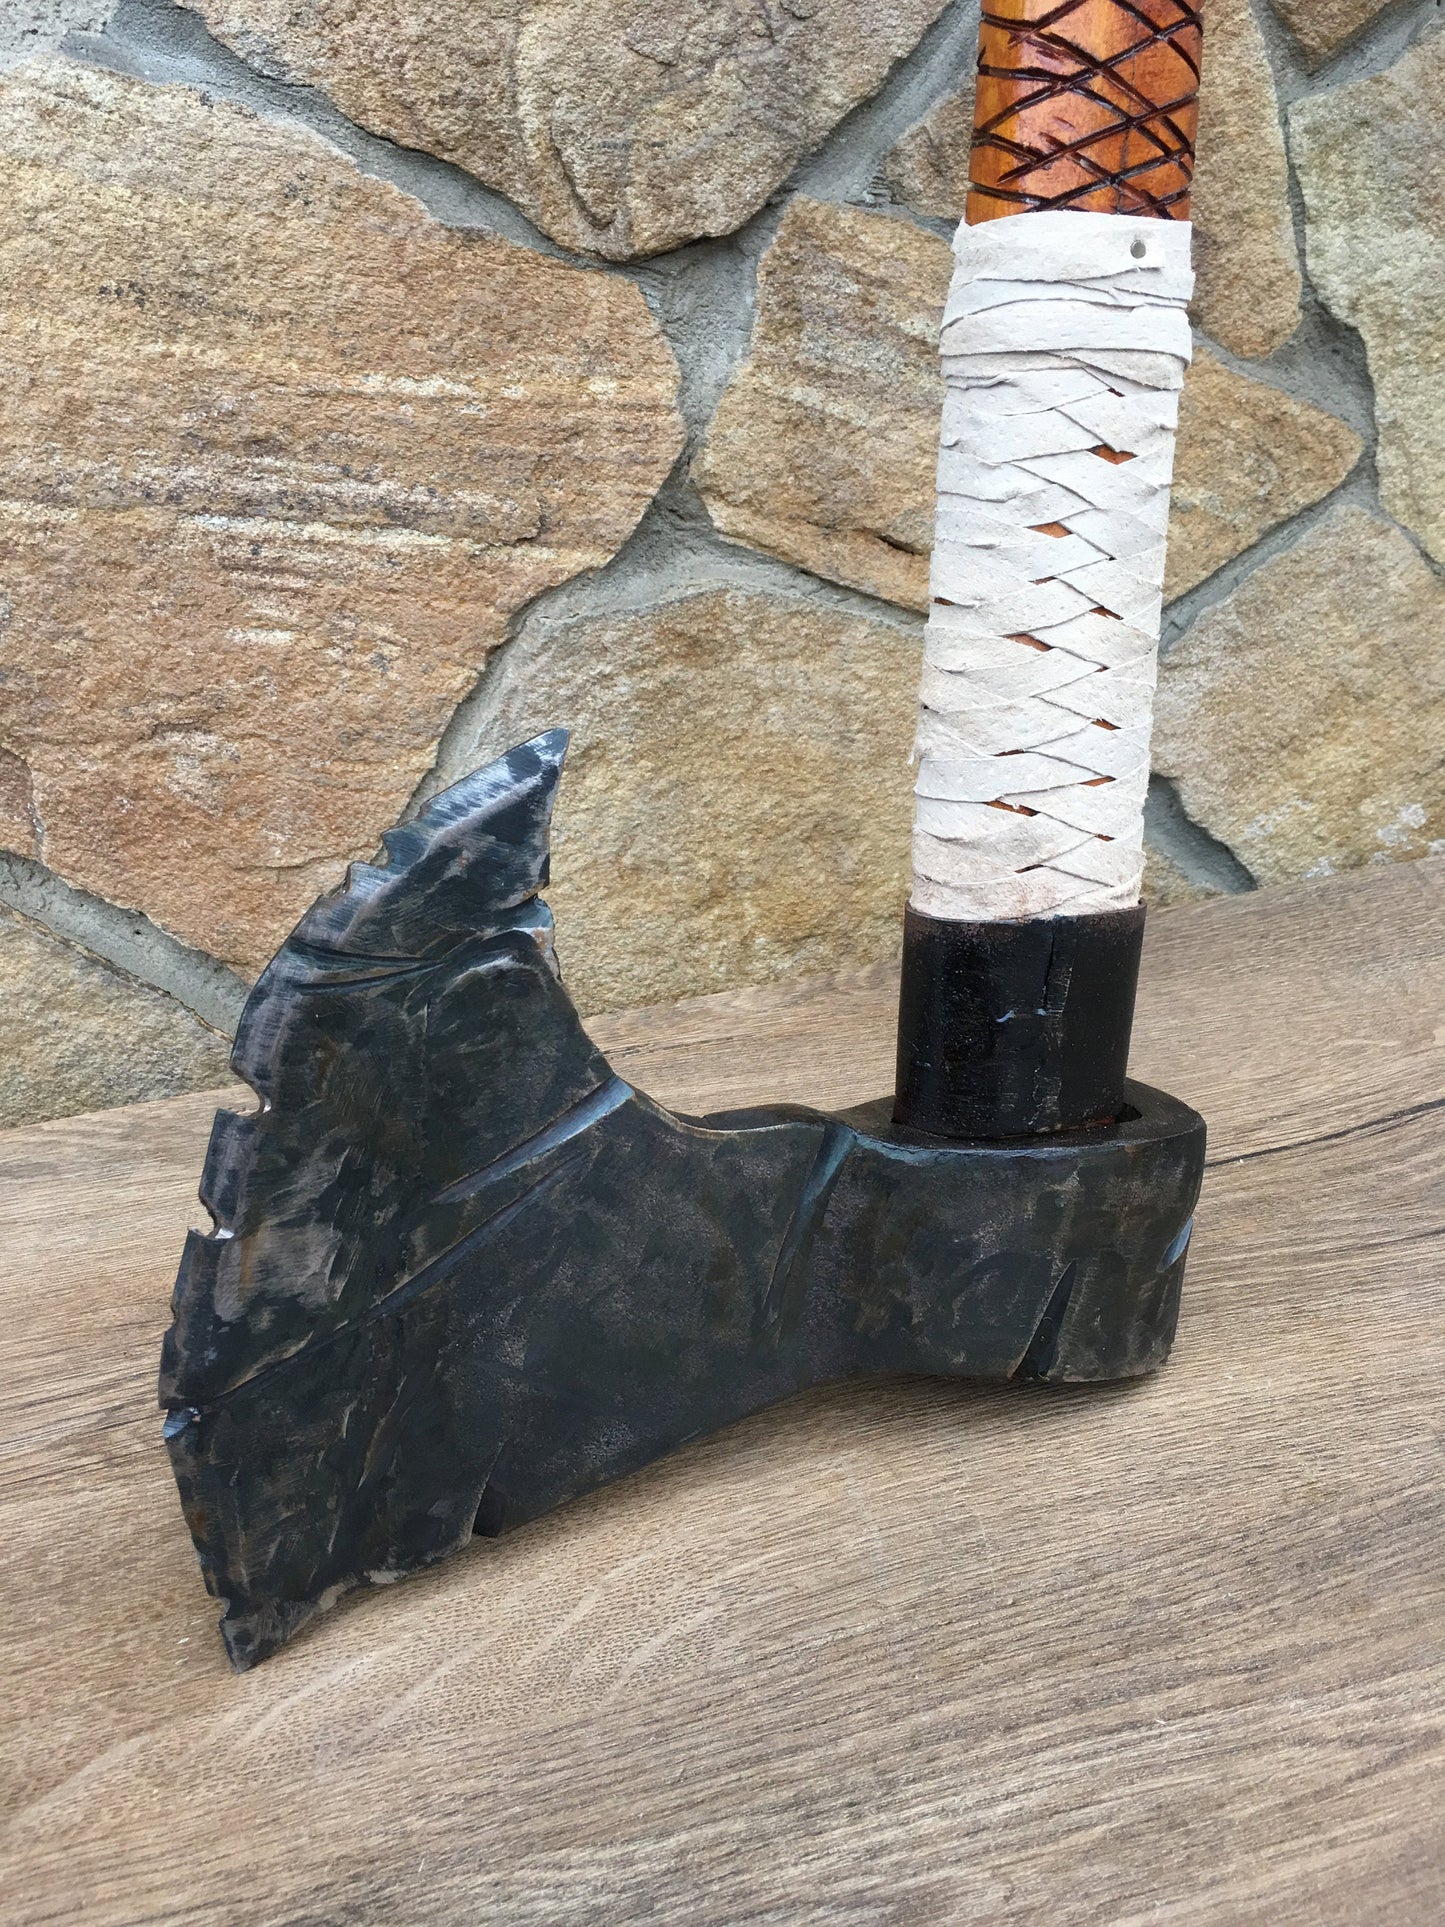 Berserker axe, viking axe, For Honor axe, costume weapon, cosplay, The Vikings, gamer gifts, Skyrim, viking warrior, collectible cosplay,axe